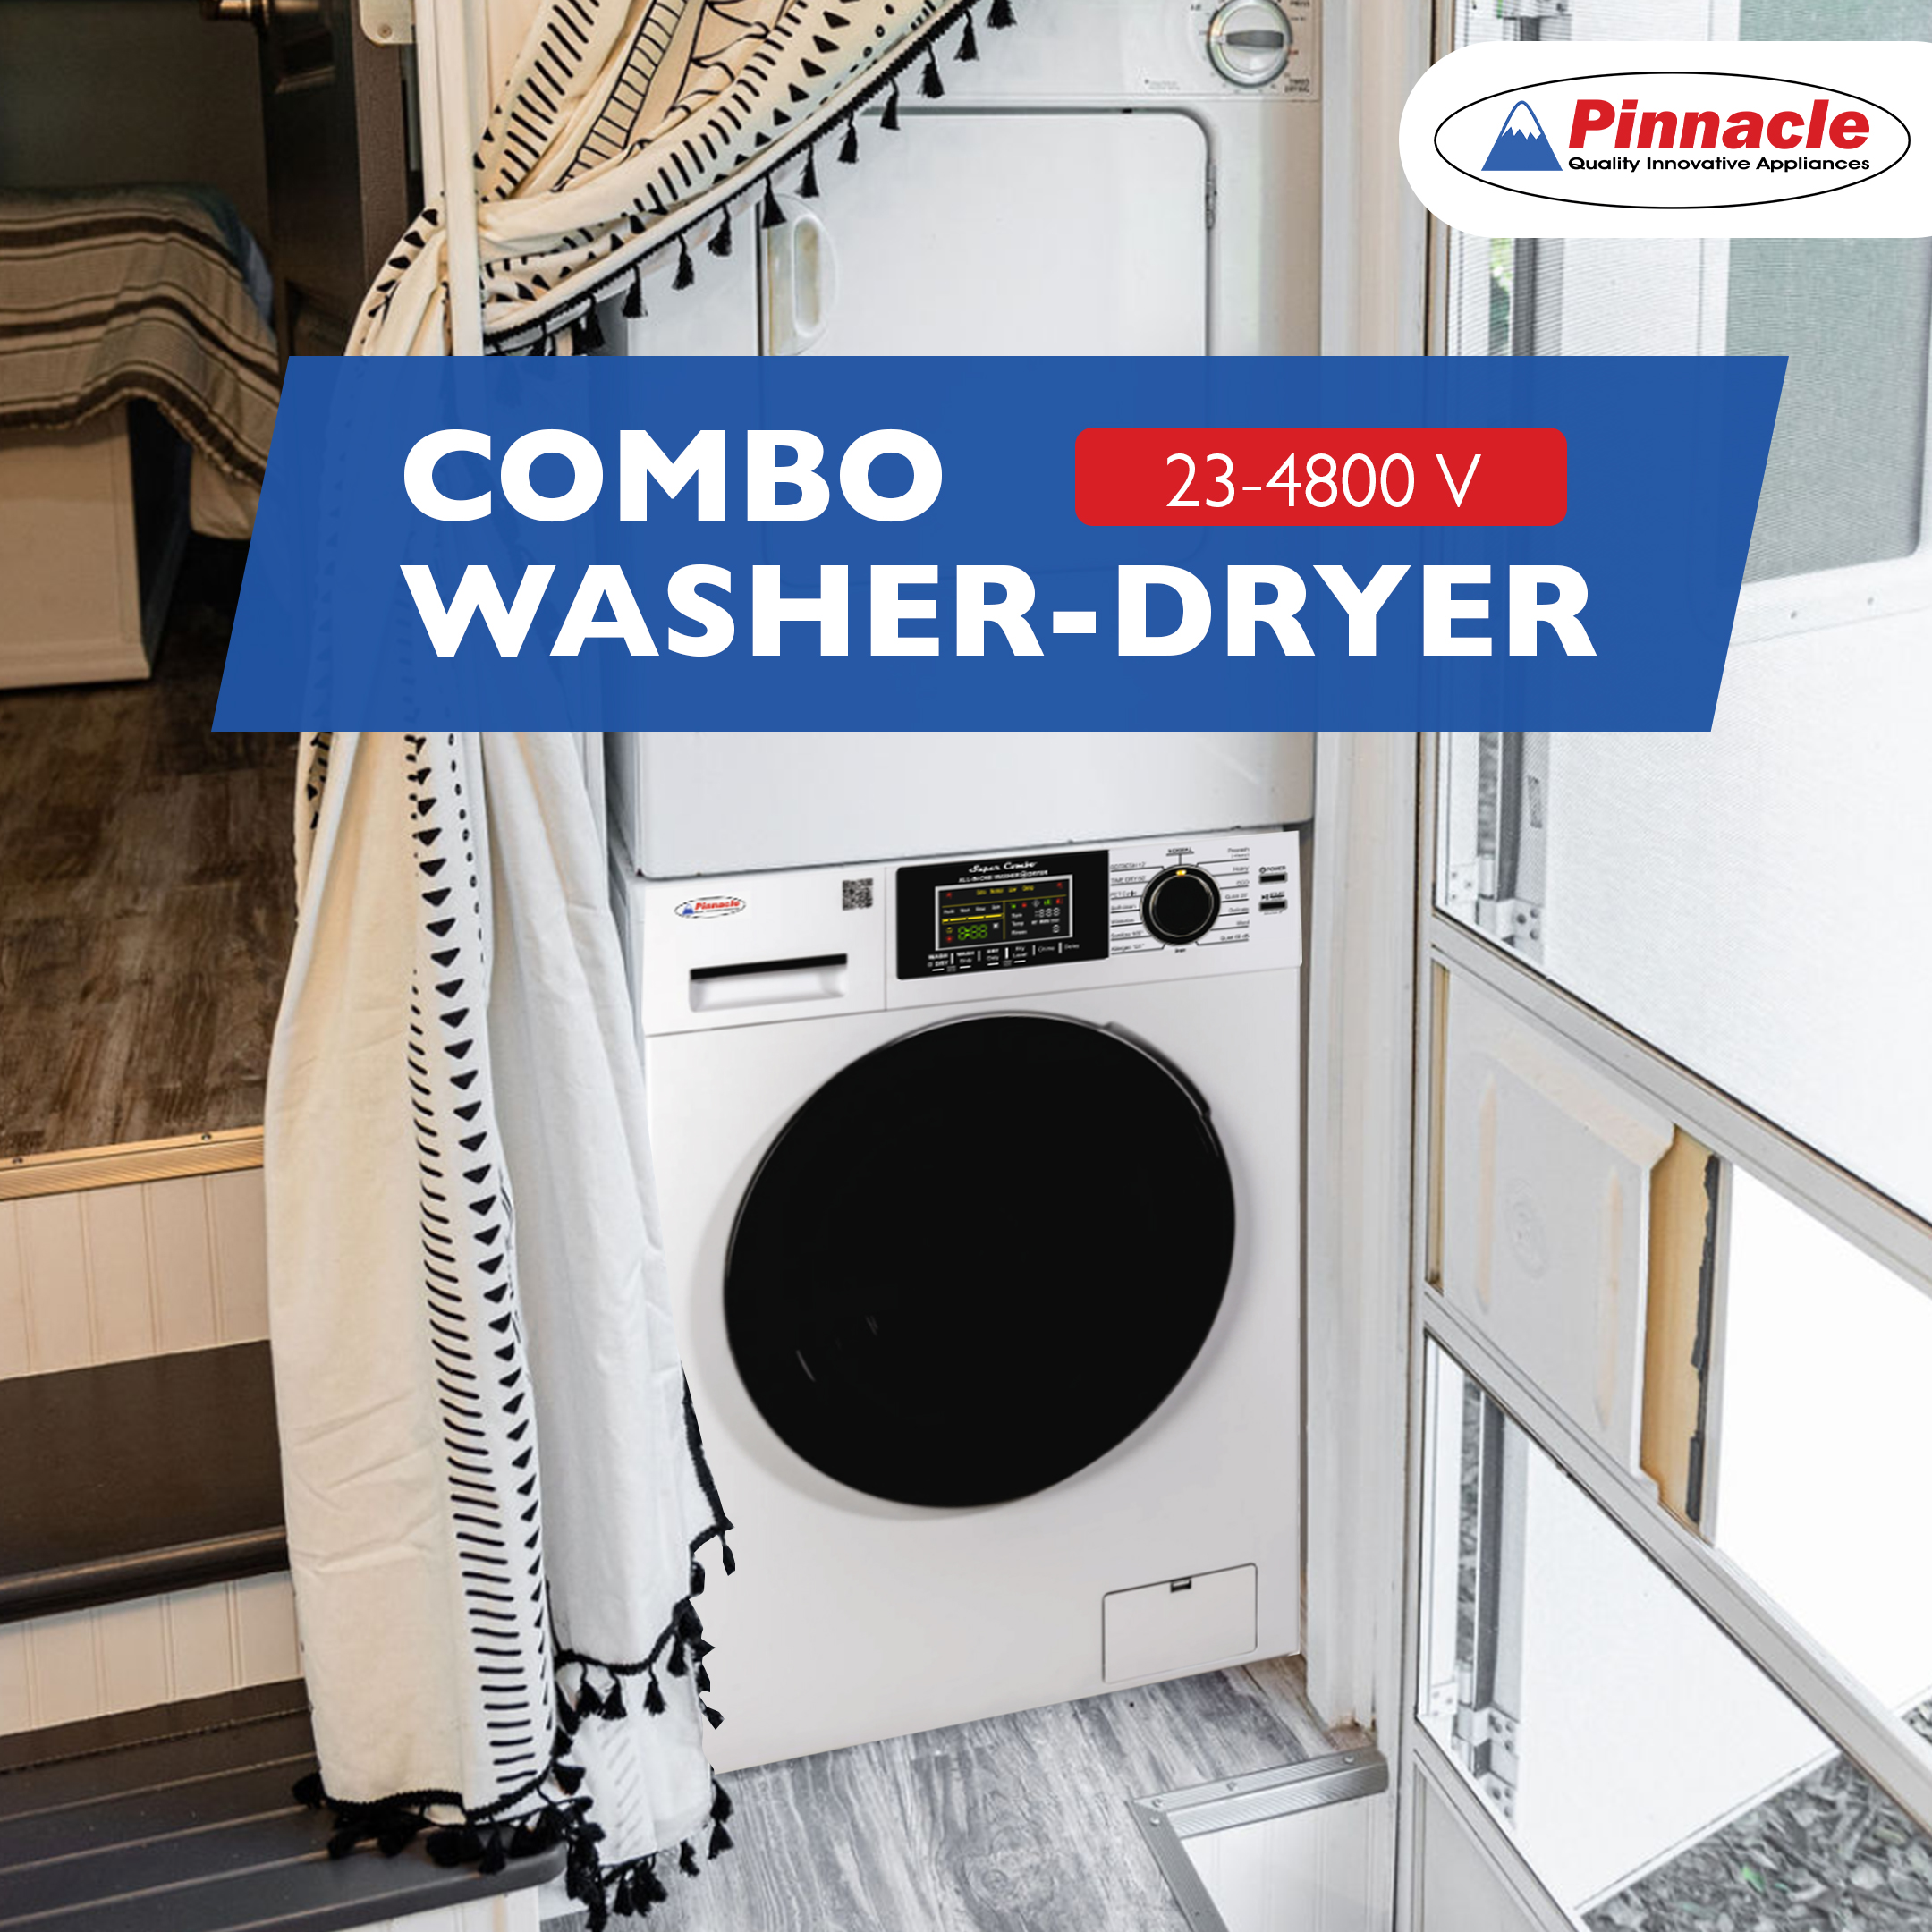 All-In-One Combo Washer-Dryer Becomes Top Selling Appliance For Pinnacle Combos